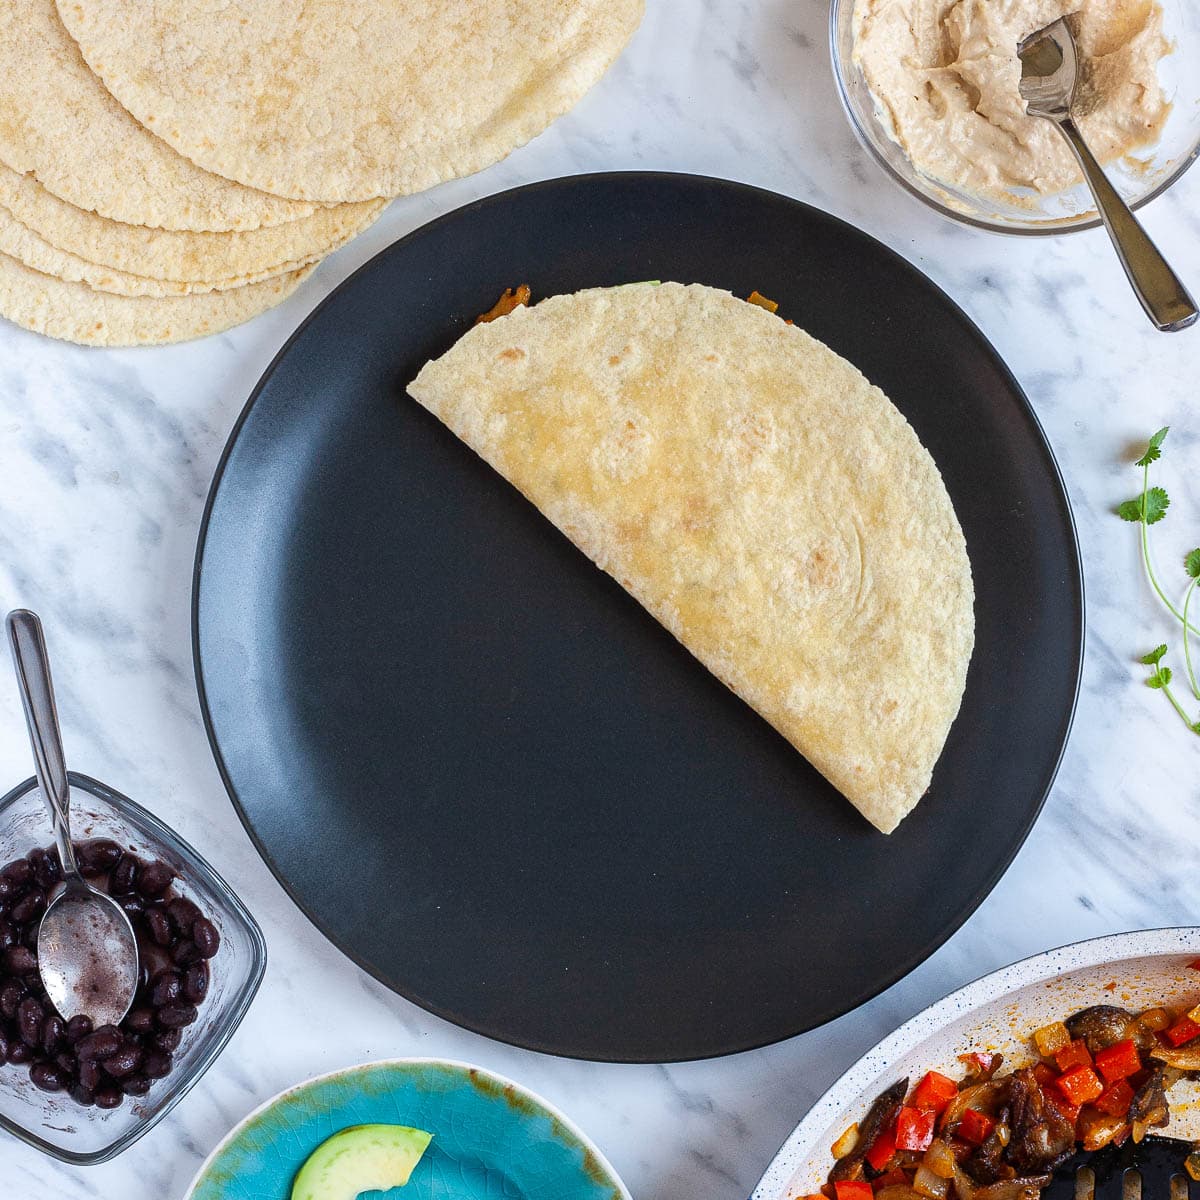 A folded tortilla on a black plate. The fillings are around it like cooked veggies, avocado slices, black beans, more tortilla and more hummus.